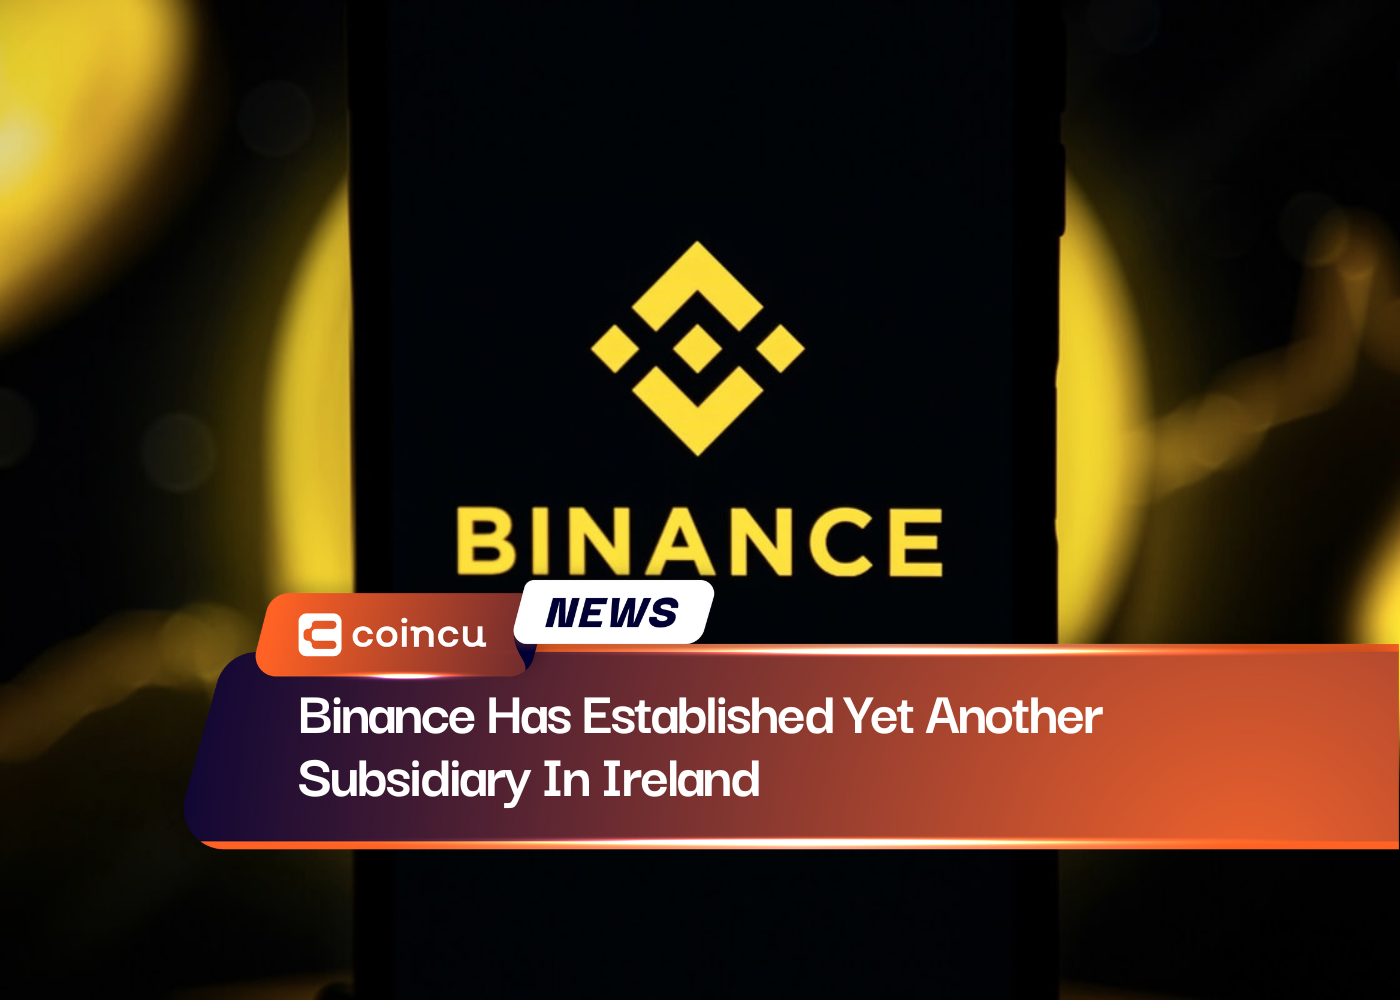 Binance Has Established Yet Another Subsidiary In Ireland